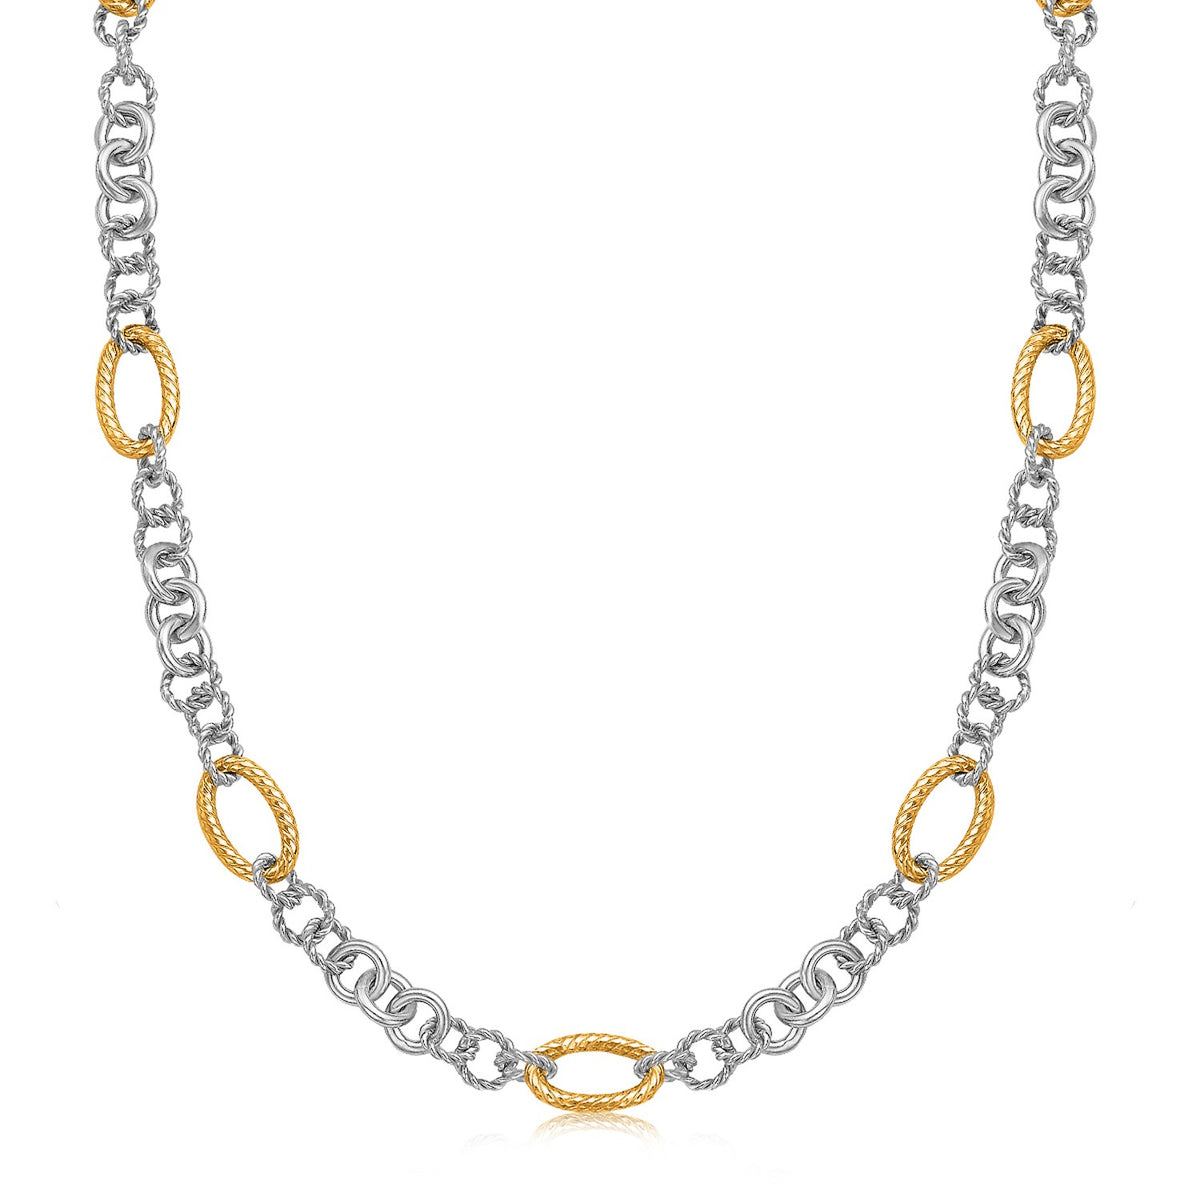 Multi Style Chain Necklace - 18k Yellow Gold and Silver